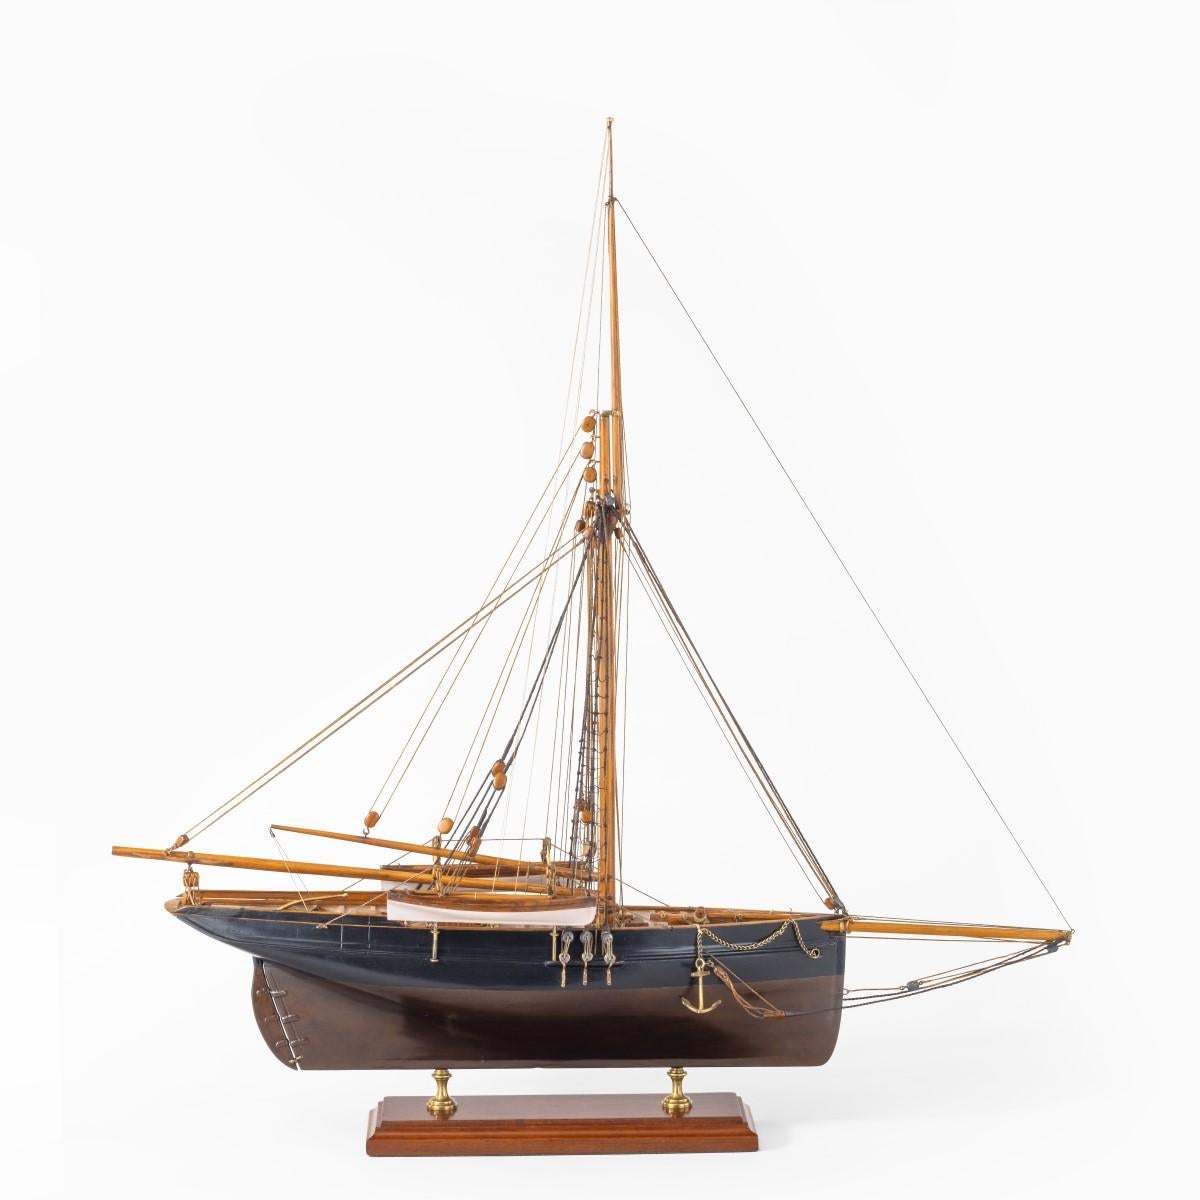 A shipyard model of a gaff-rigged Newhaven Smack, the hull carved from the solid with a scored deck, wood and metal fittings including metal anchors with chains, a hawse pipe and winch, deck lights, companionways, tiller, two boats sprung out on